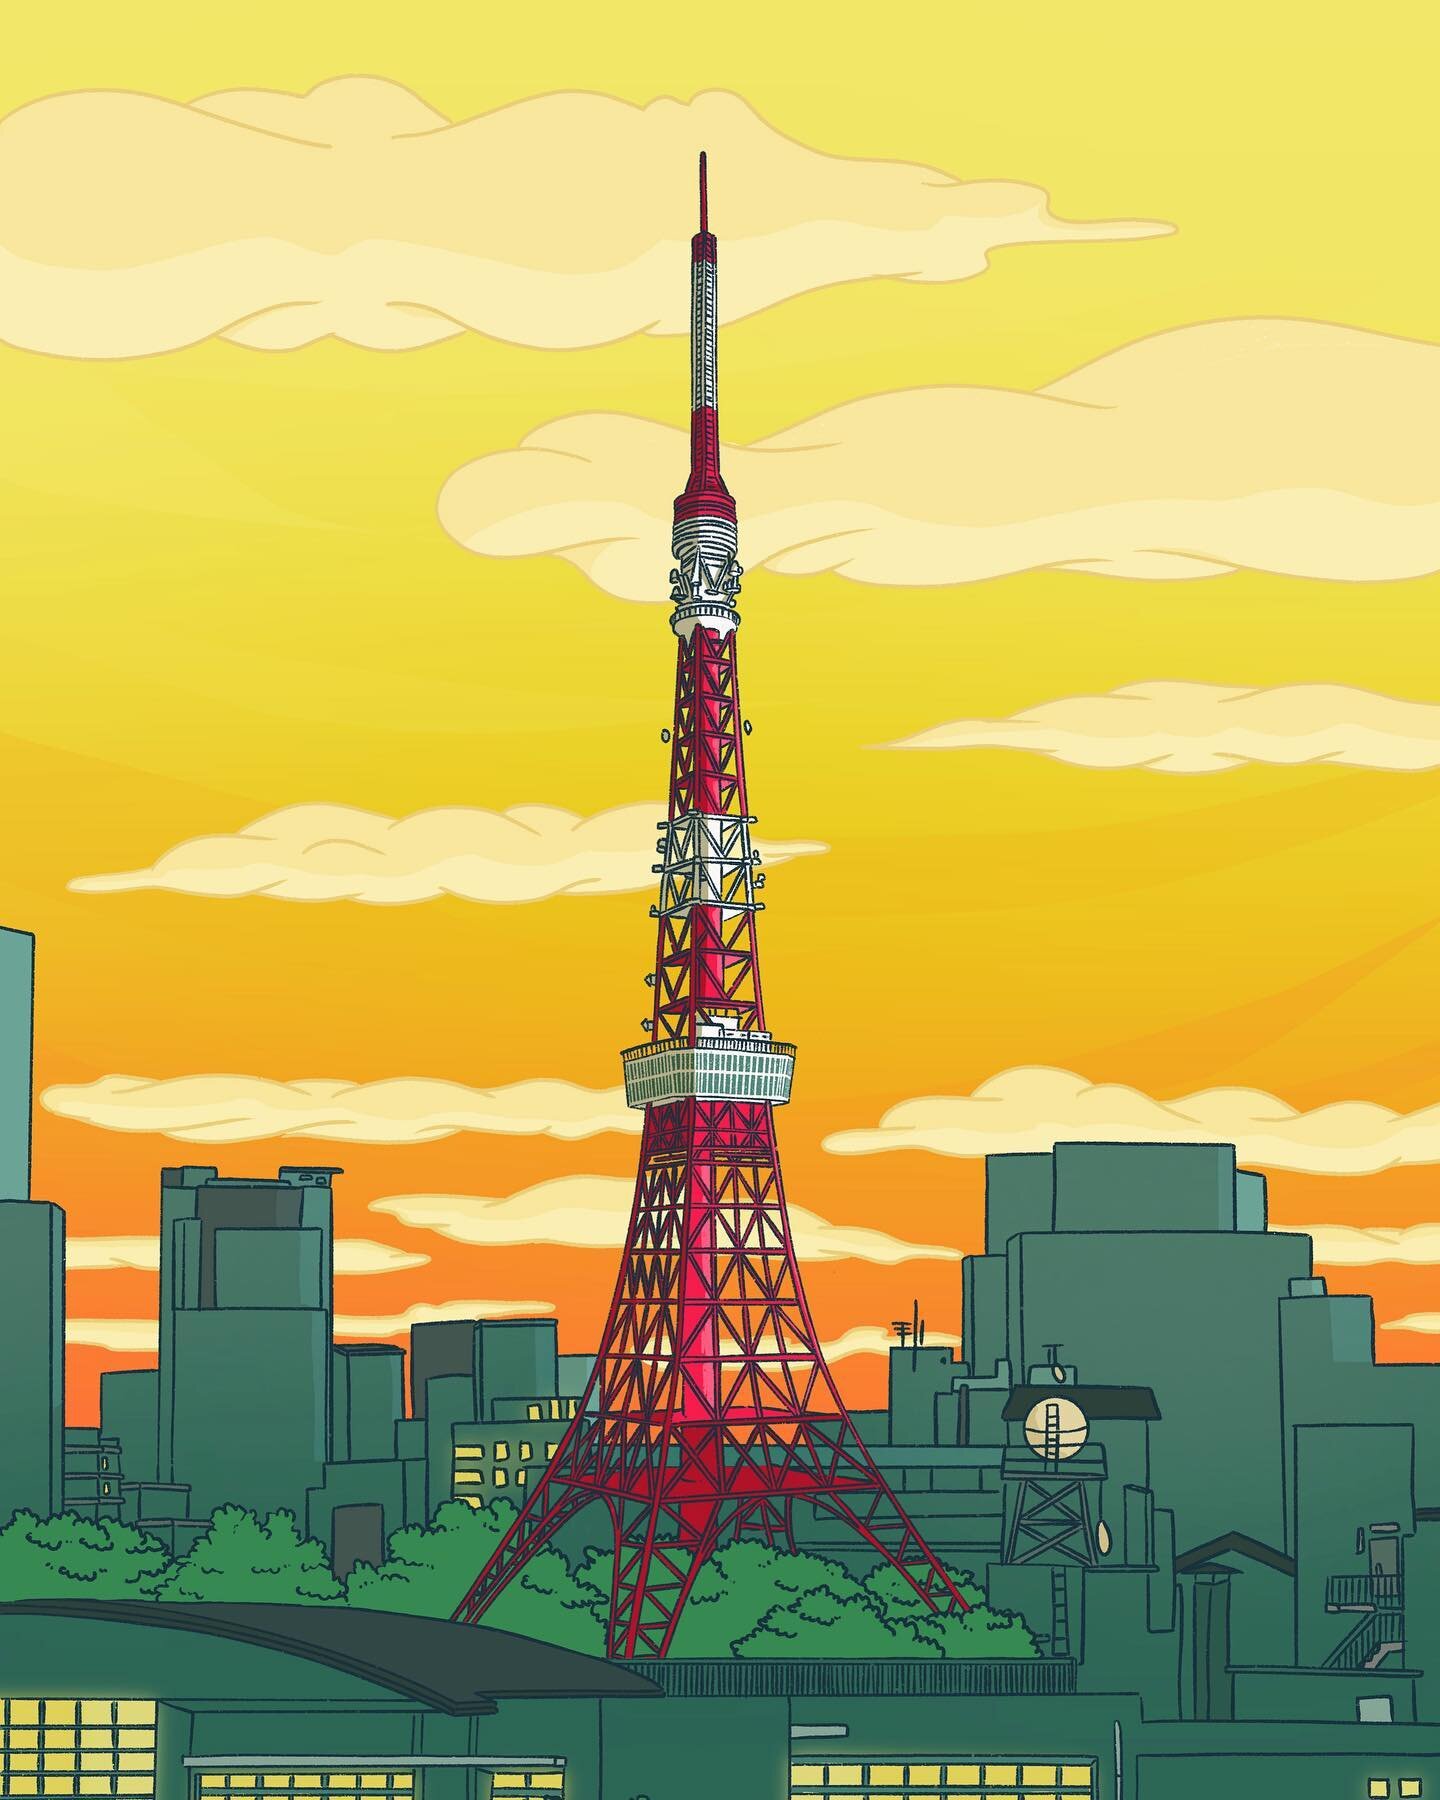 Tokyo Tower 🗼(it has its own emoji!!) - is located in the Minato ward in Tokyo, Japan and it is officially called &ldquo;Japan Radio Tower&rdquo; 日本電波塔. It is a steel truss tower used for broadcasting and as a tourist attraction. It is the second ta